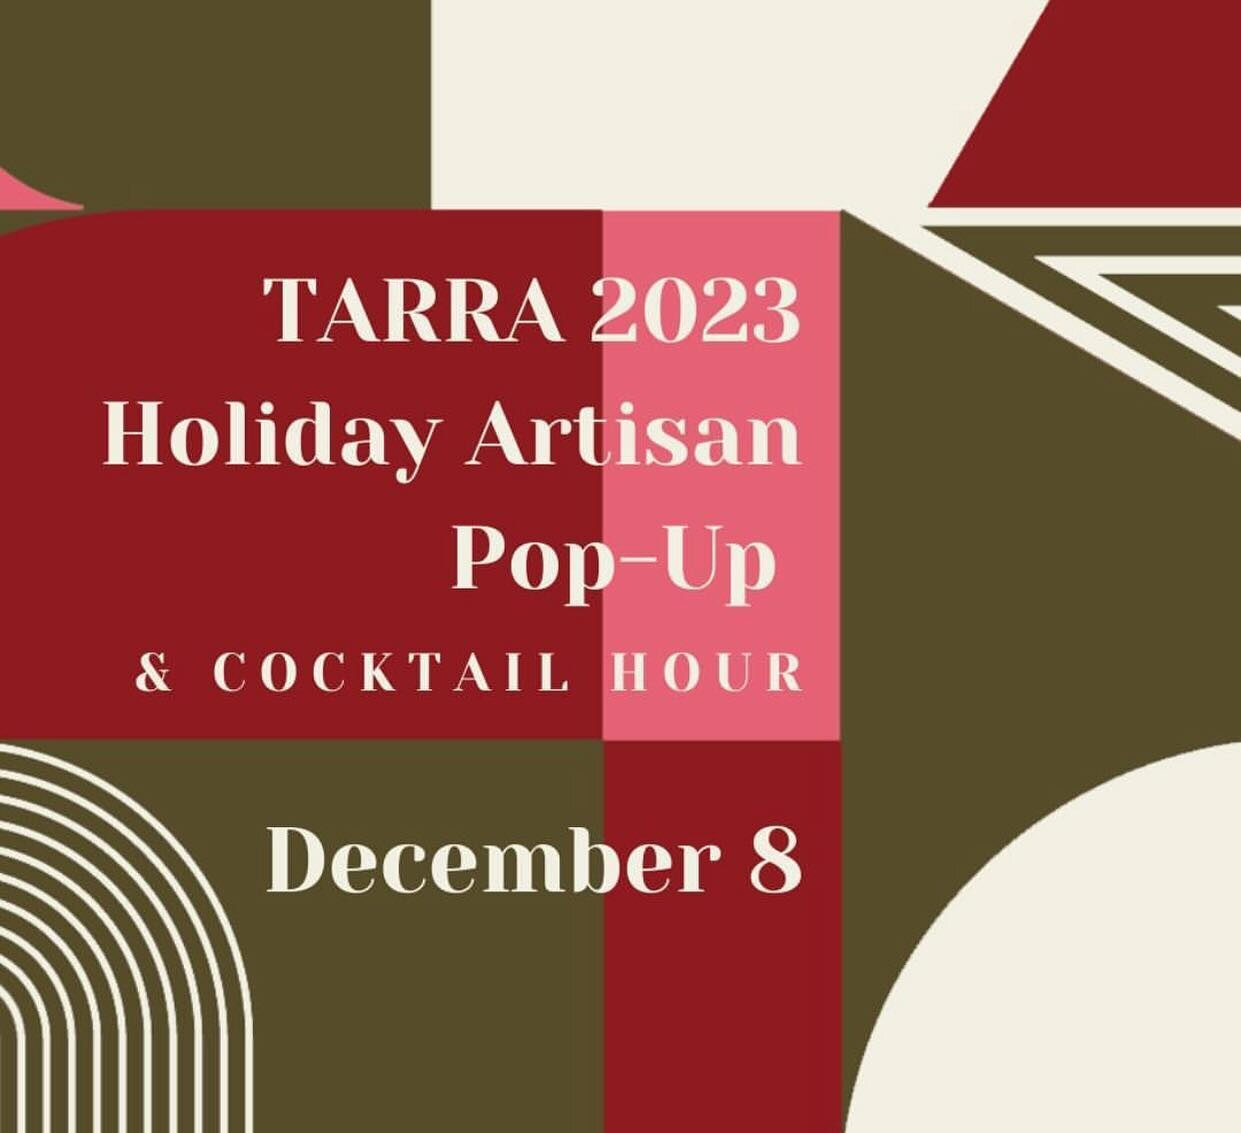 &lsquo;Tis the season for style, substance and sustaining small businesses. 

Celebrate Colorado makers, artisans and designers at the 2023 TARRA 9+CO Holiday Pop Up featuring 8 local woman-owned companies.

Members Only Shopping 10-12pm

Open to the